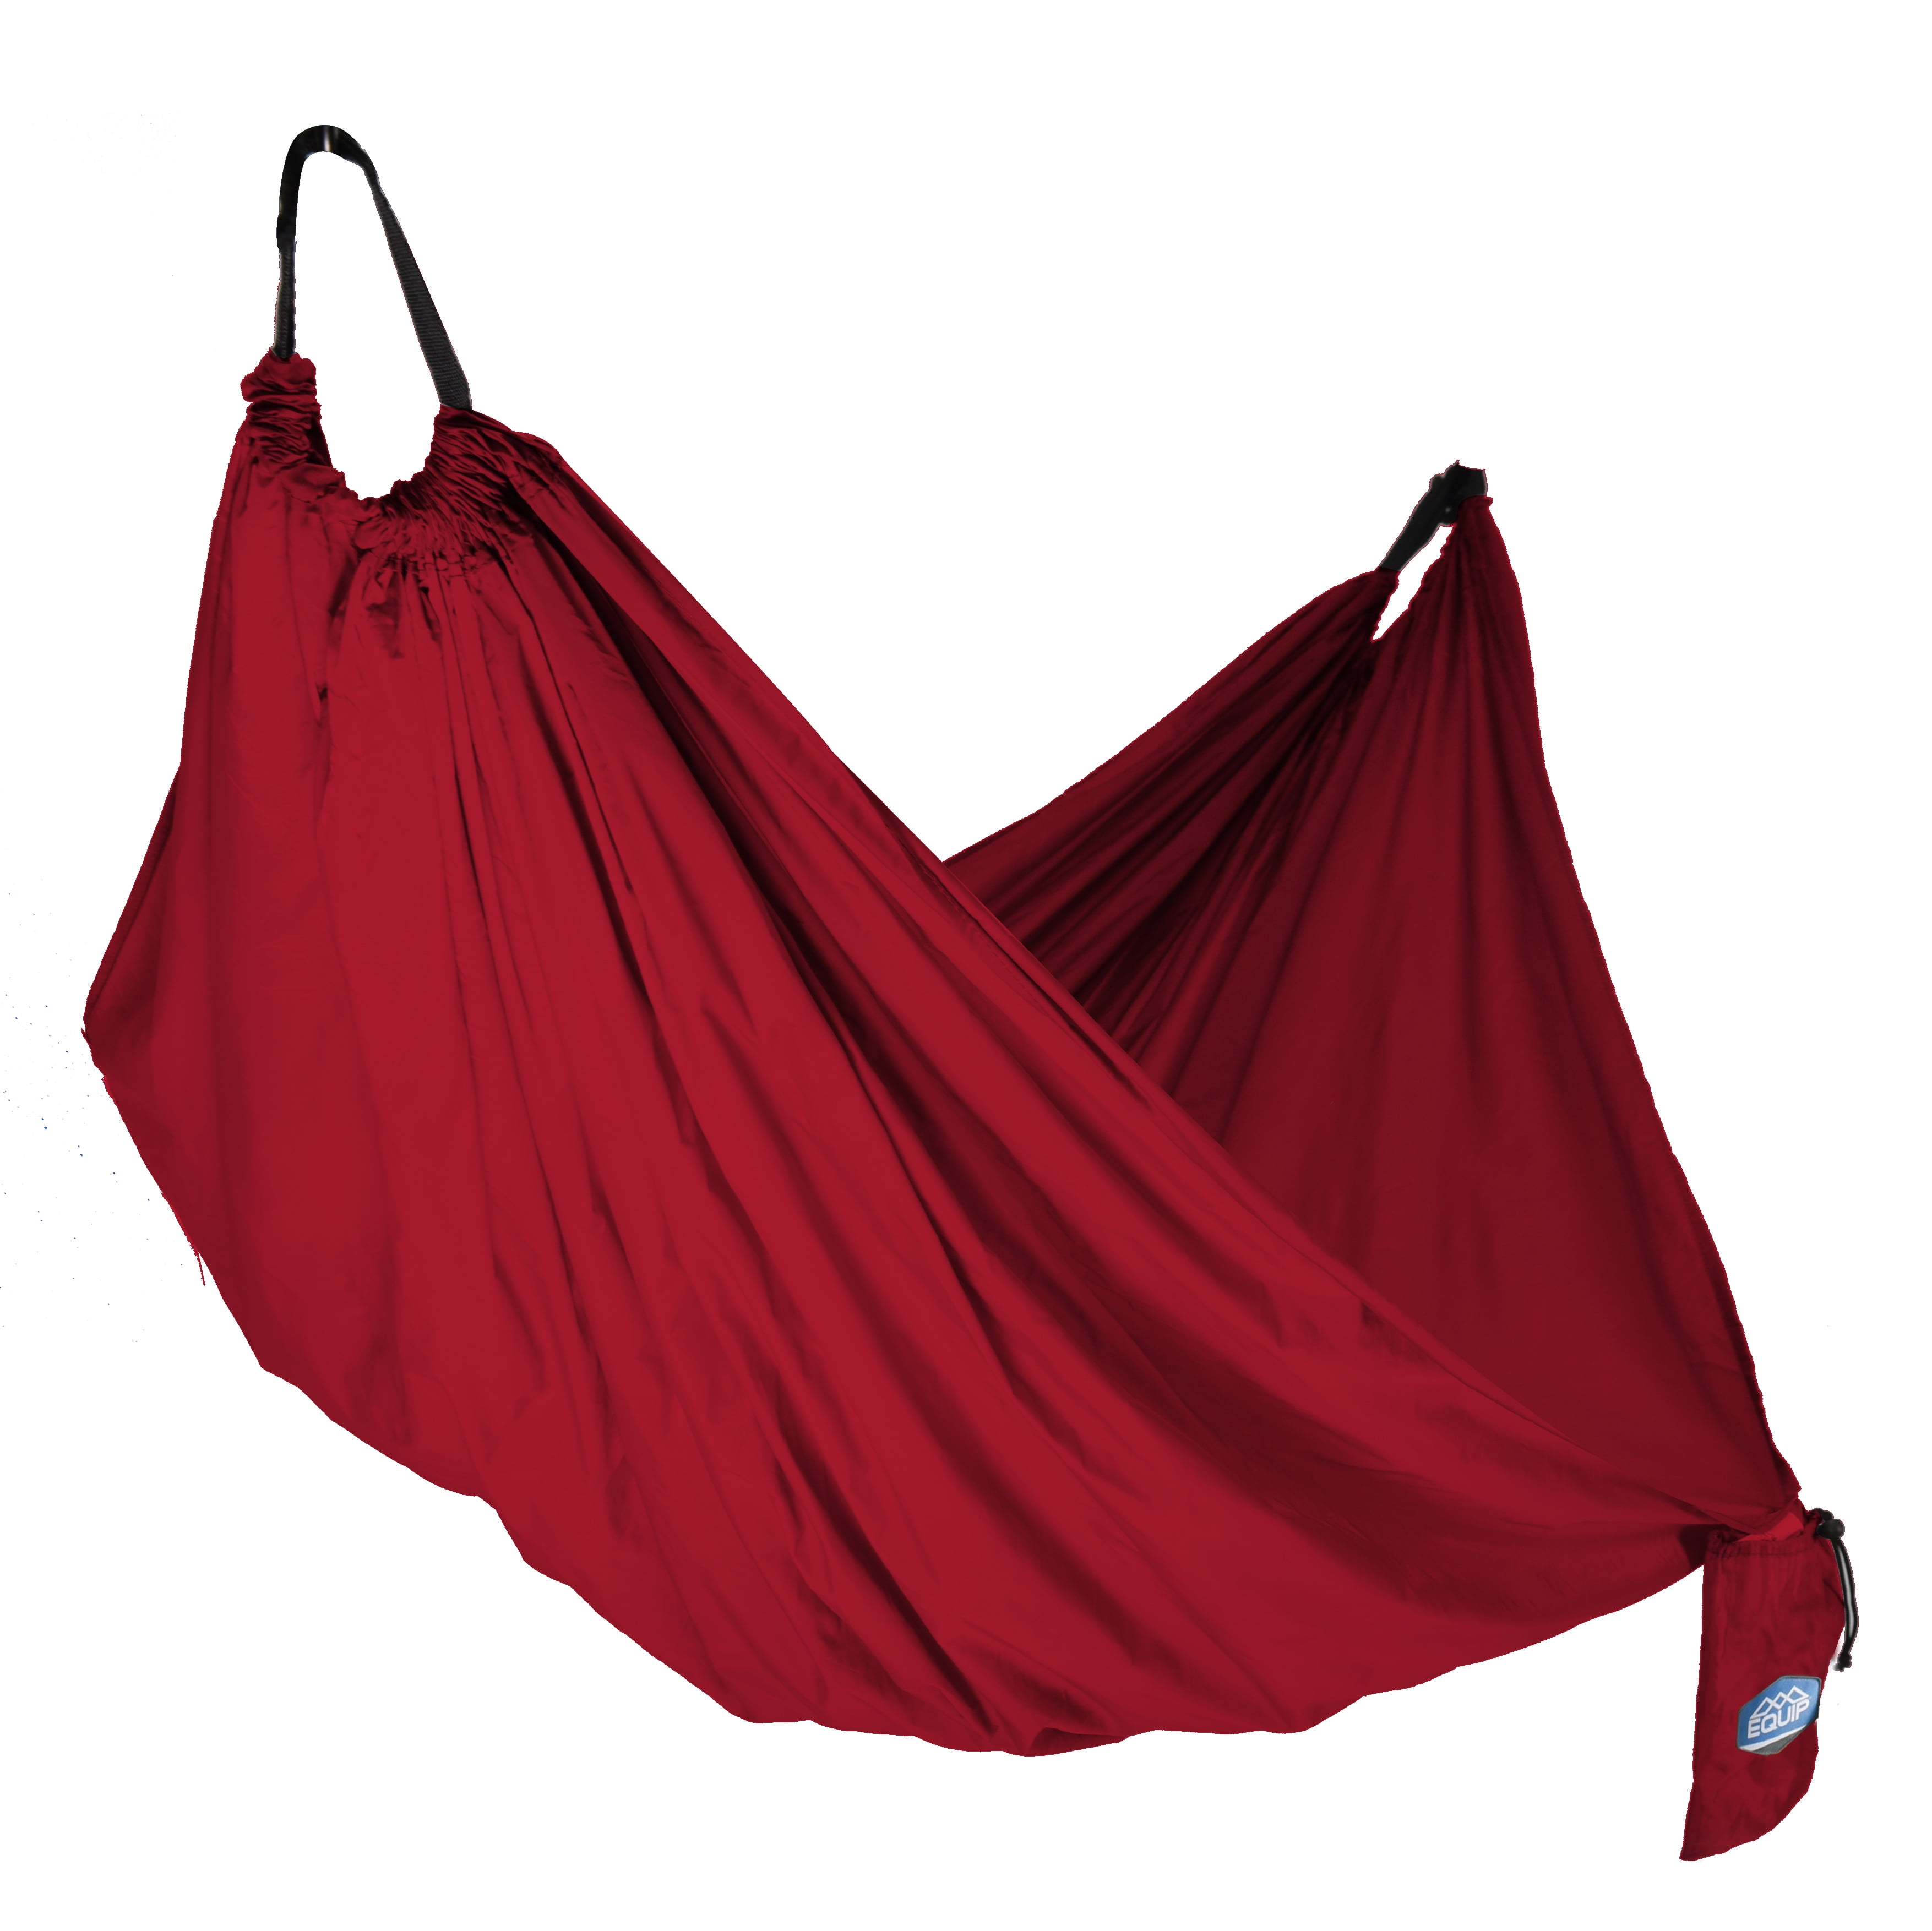 EQUIP Recycled Brick Red 1 Person Hammock Open Size 108" L x 56" W